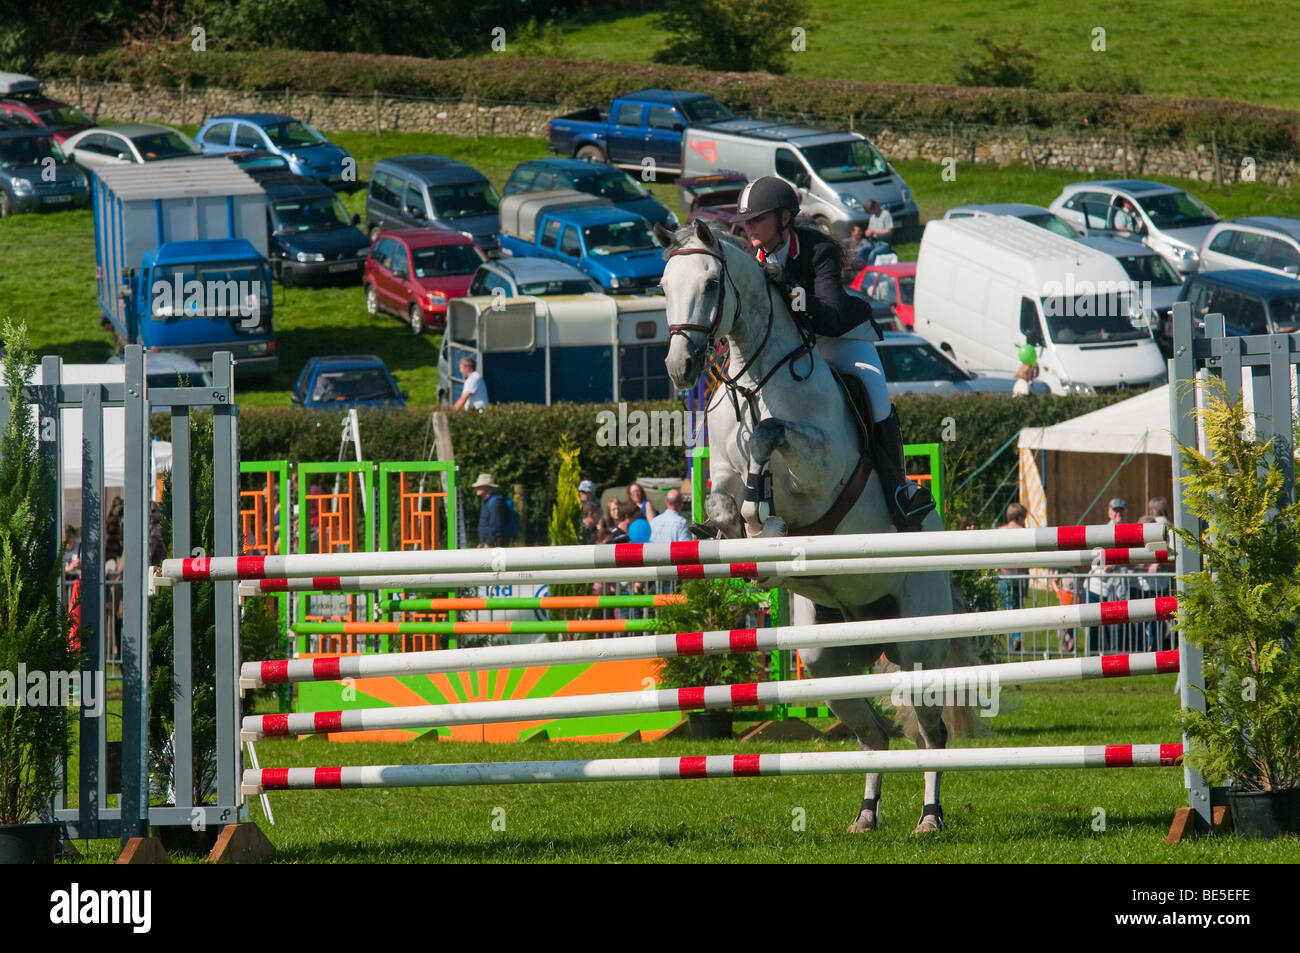 Show Jumping à Westmorland County Agricultural Show. Banque D'Images